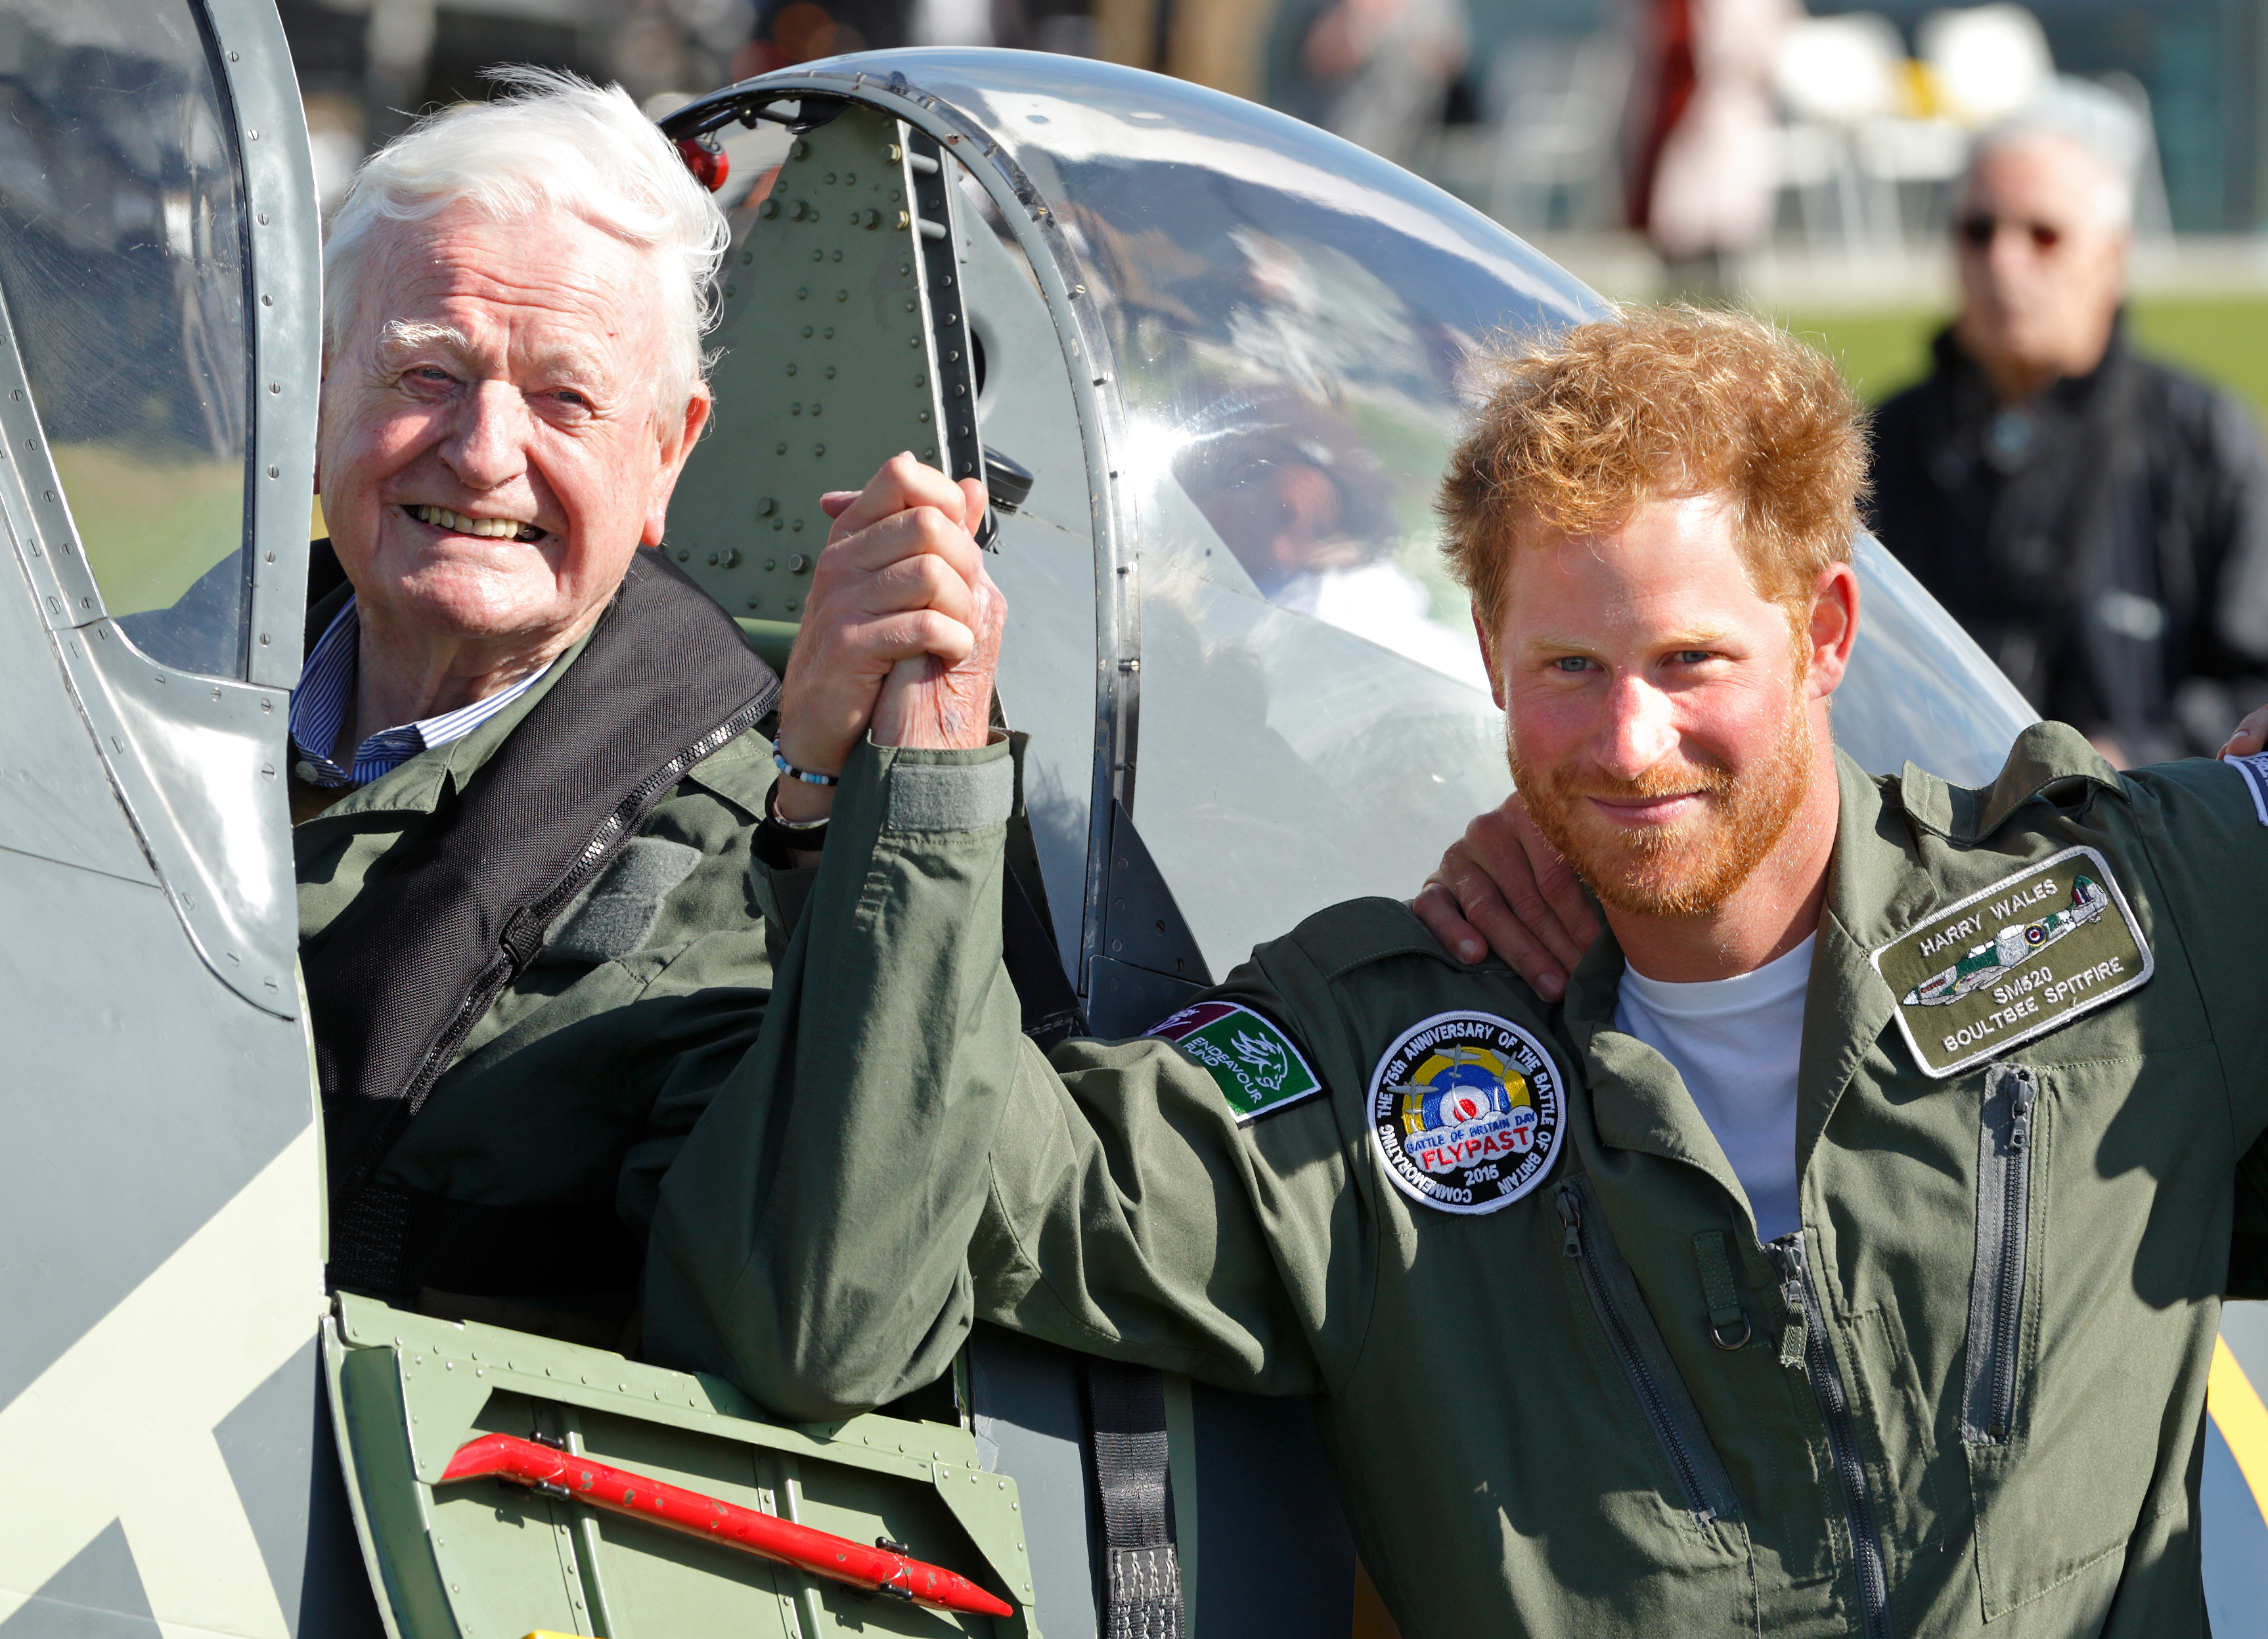 Prince Harry holds hands with 95-year-old Battle of Britain veteran Tom Neil after he landed back at Goodwood Aerodrome in his Spitfire aircraft following a Battle of Britain Flypast on Sept. 15, 2015, in Chichester, England (Max Mumby—Getty Images)